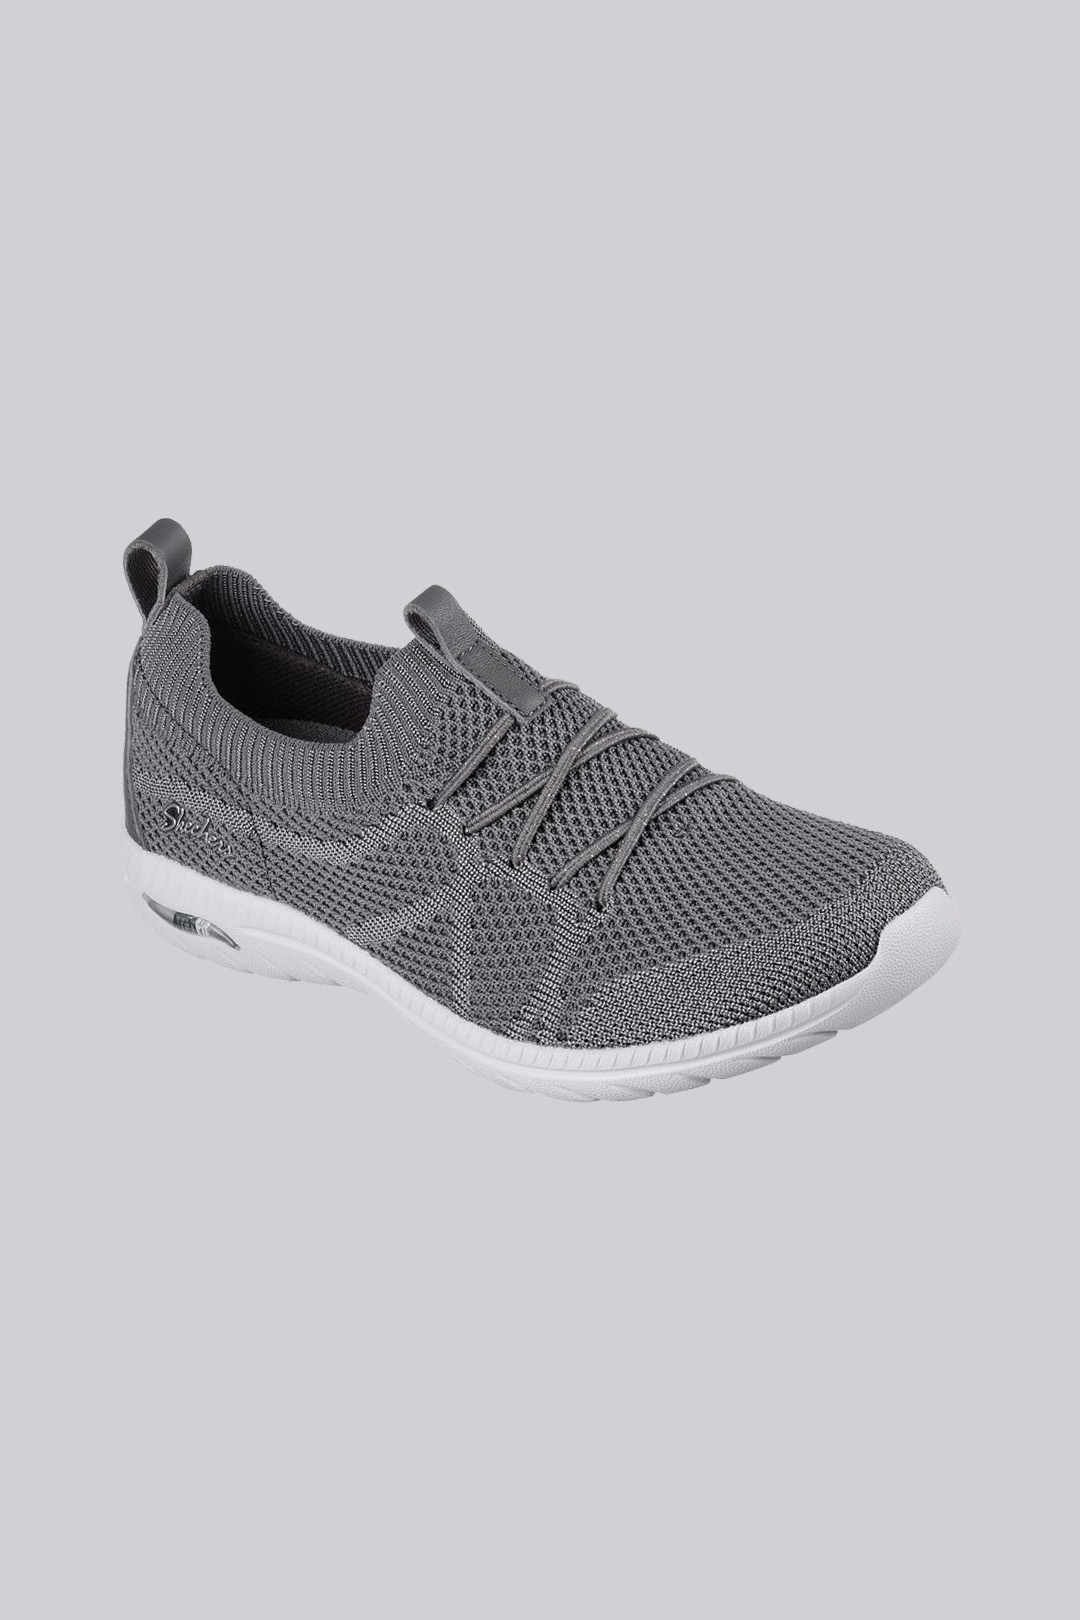 arch fit skechers womens